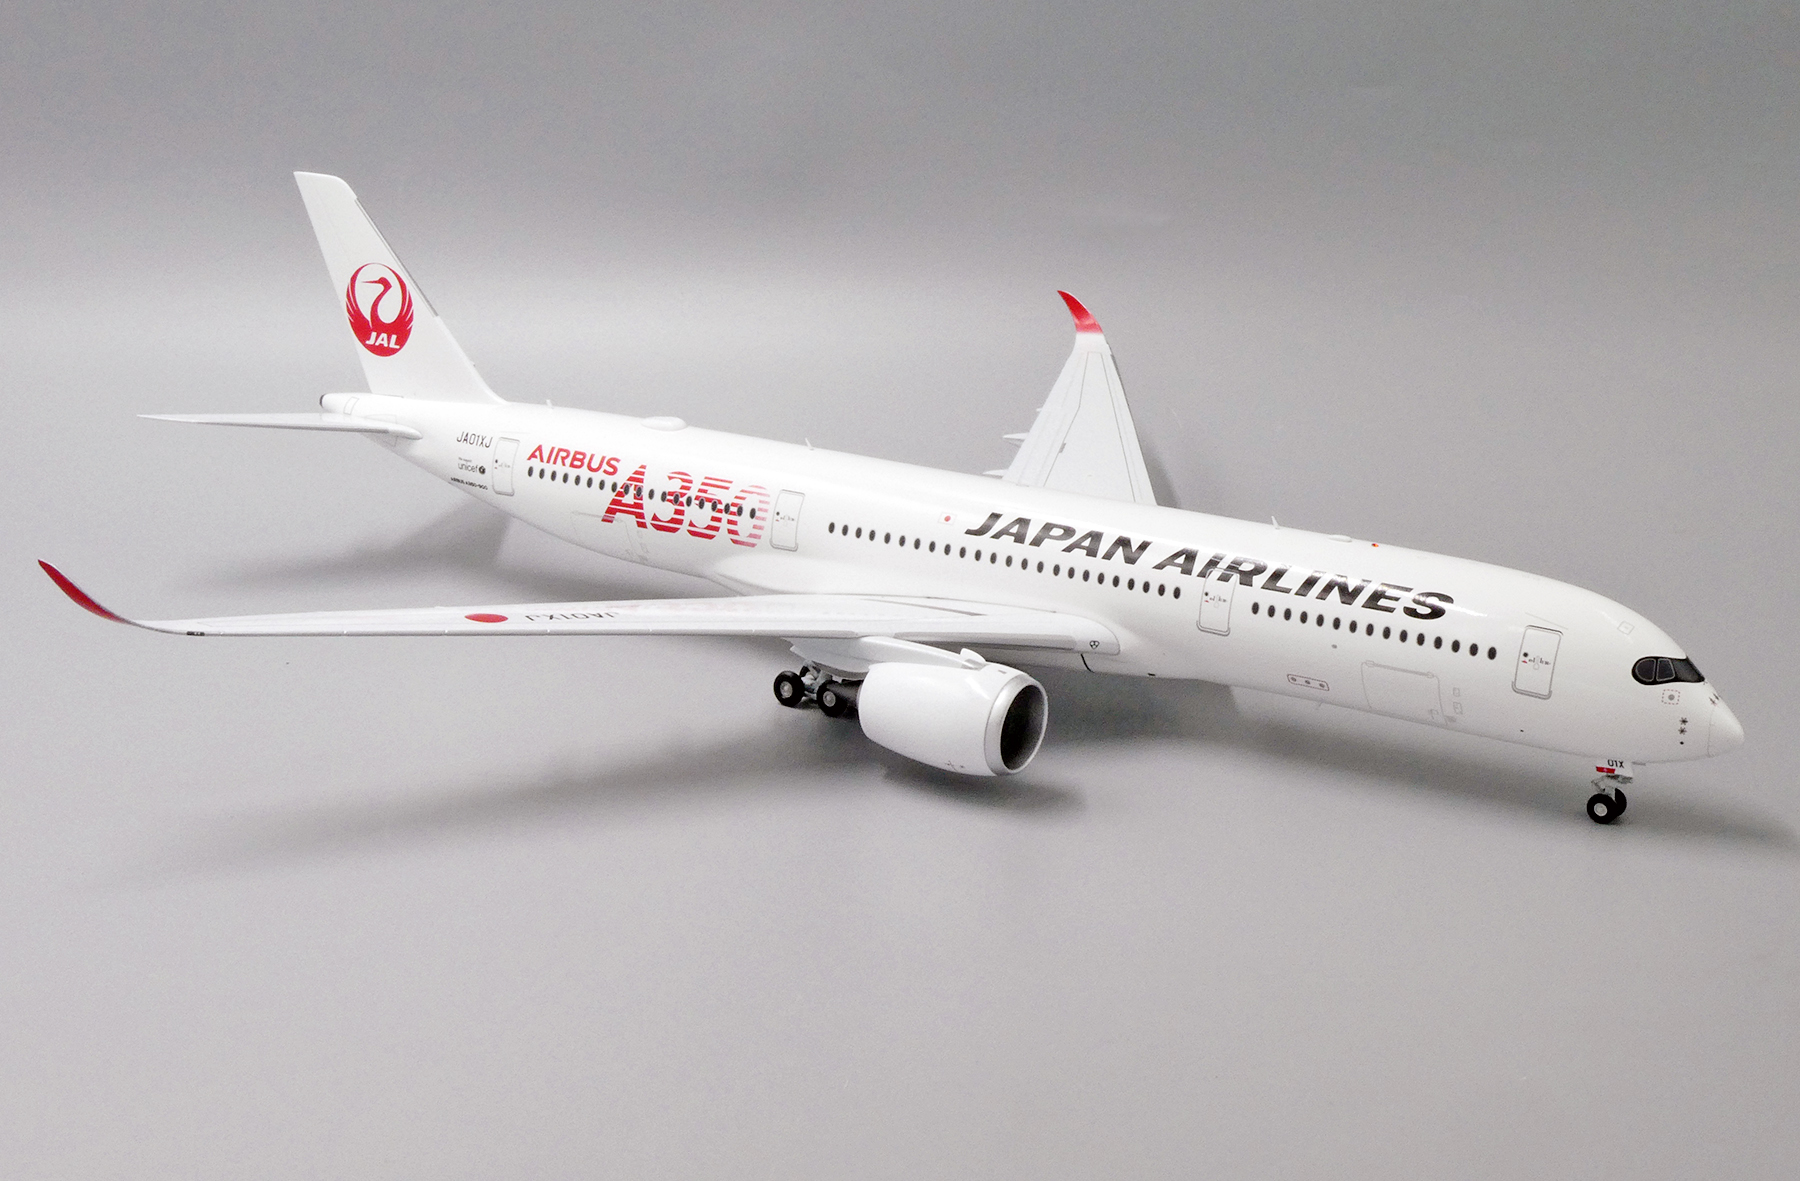 Toys & Hobbies Details about JC WINGS EW2359001 1/200 JAPAN AIRLINES ...